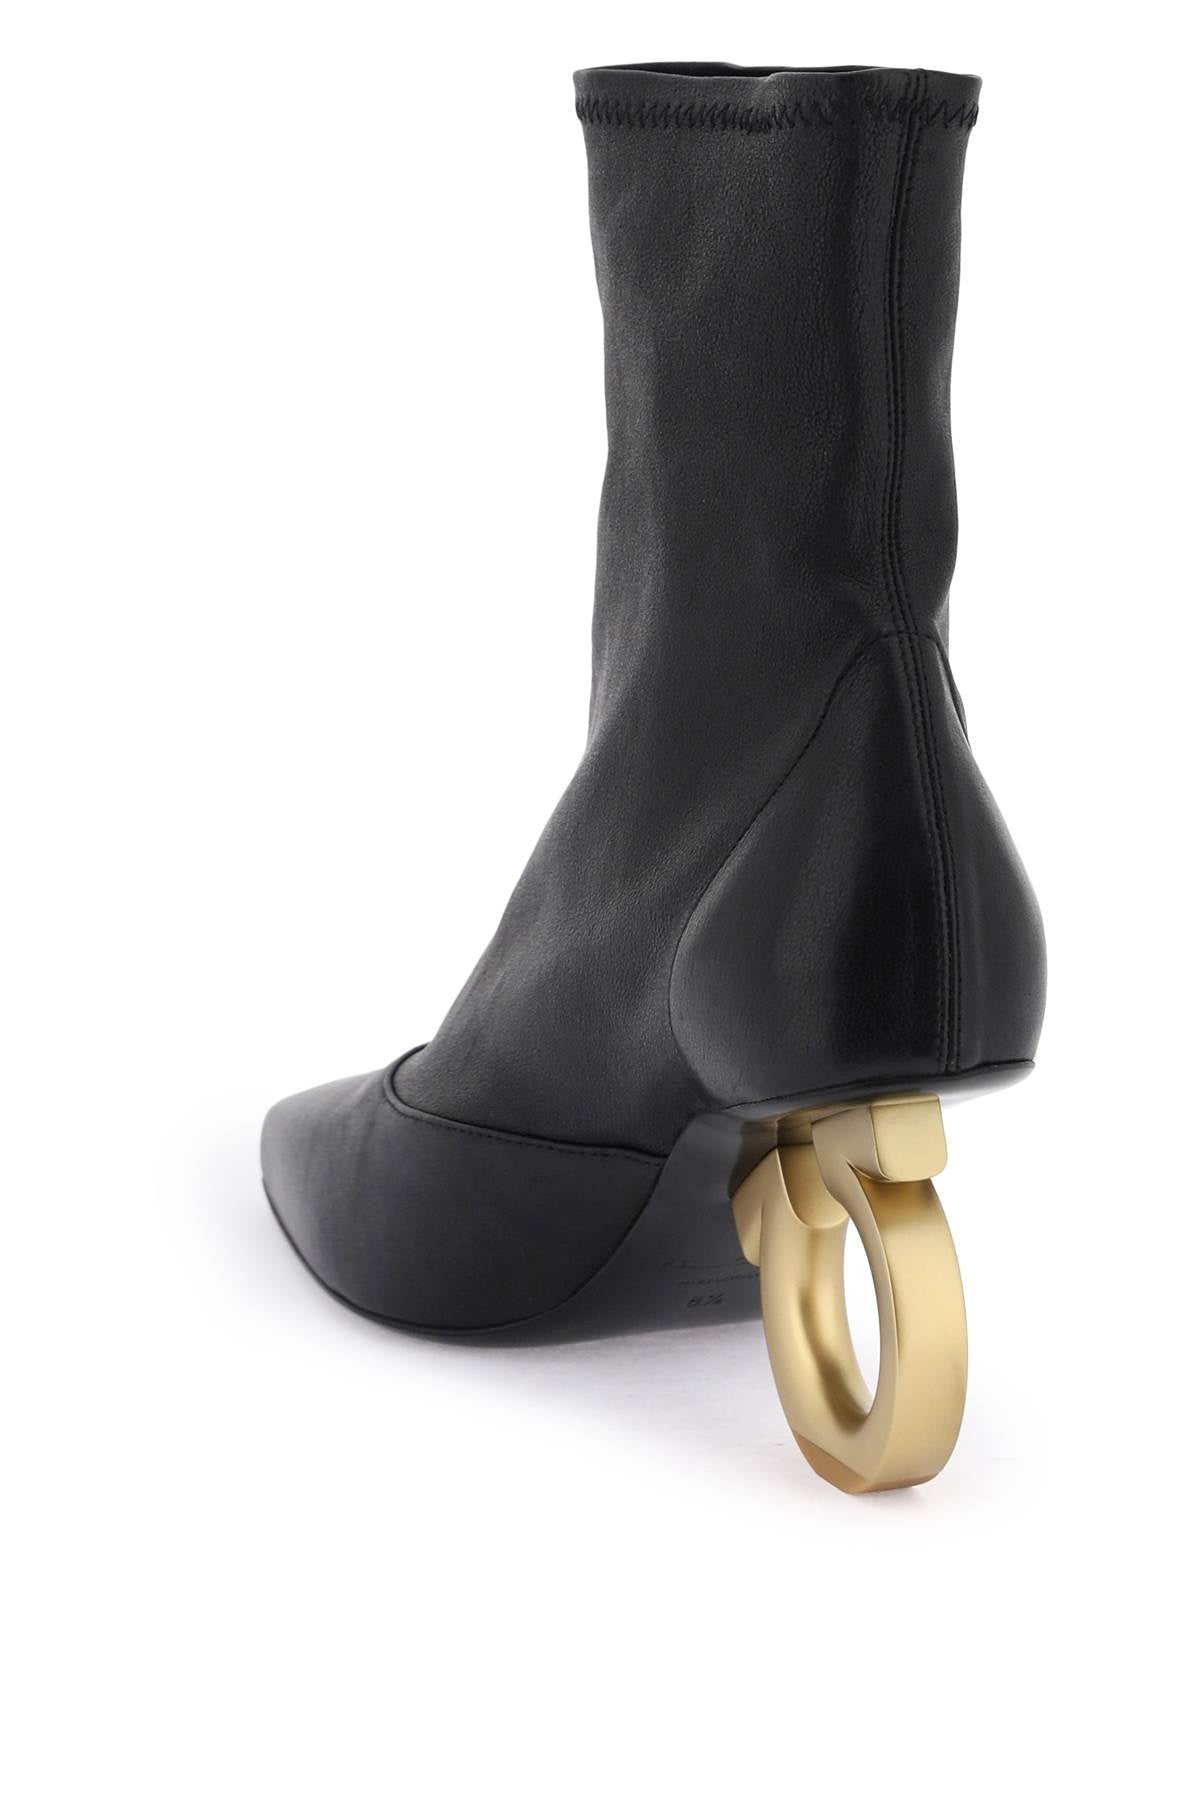 FERRAGAMO Luxurious Black Stretch Leather Ankle Boots for Women